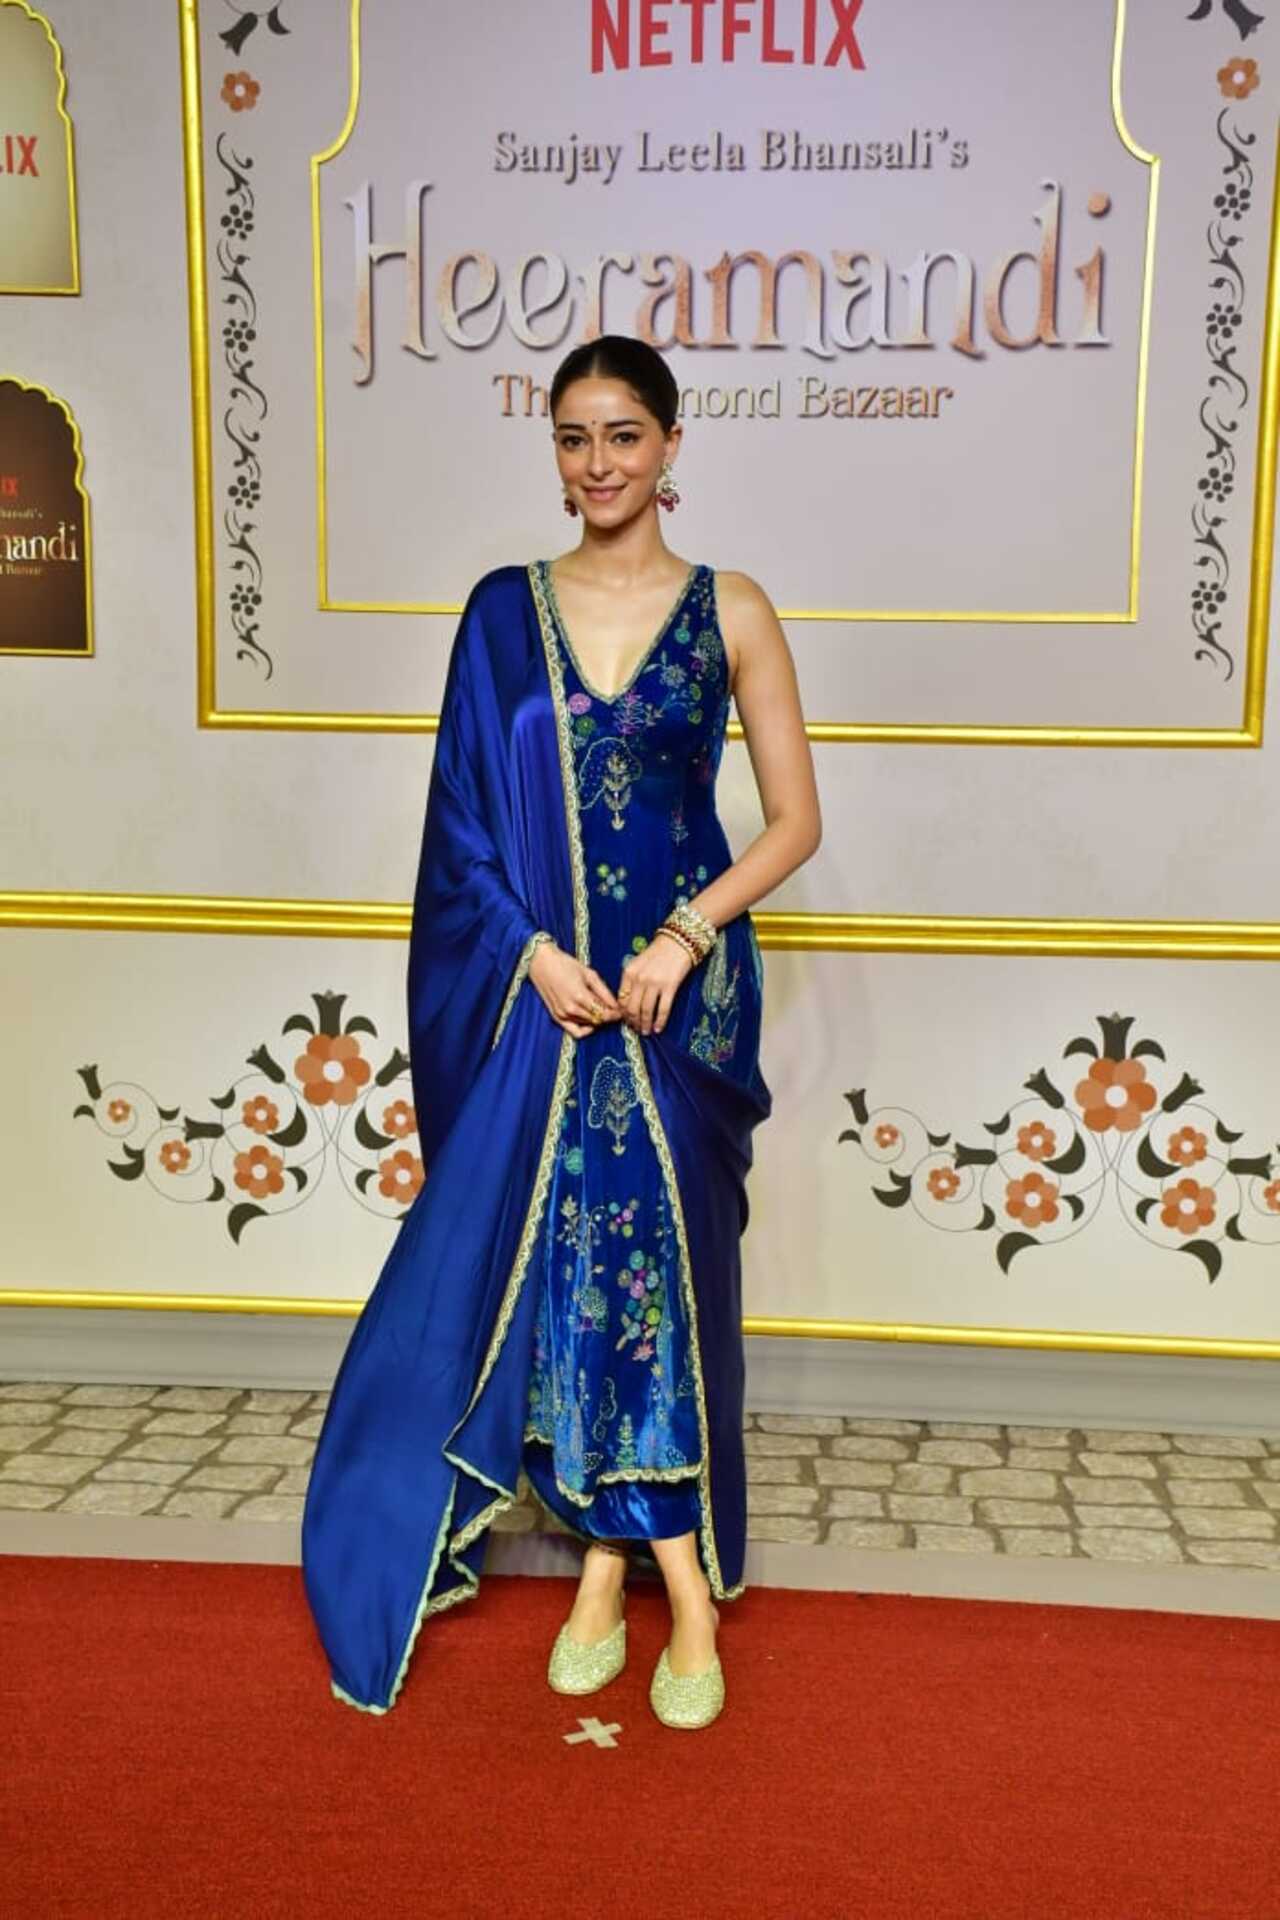 Ananya Panday shone in a bright blue suit for the occasion